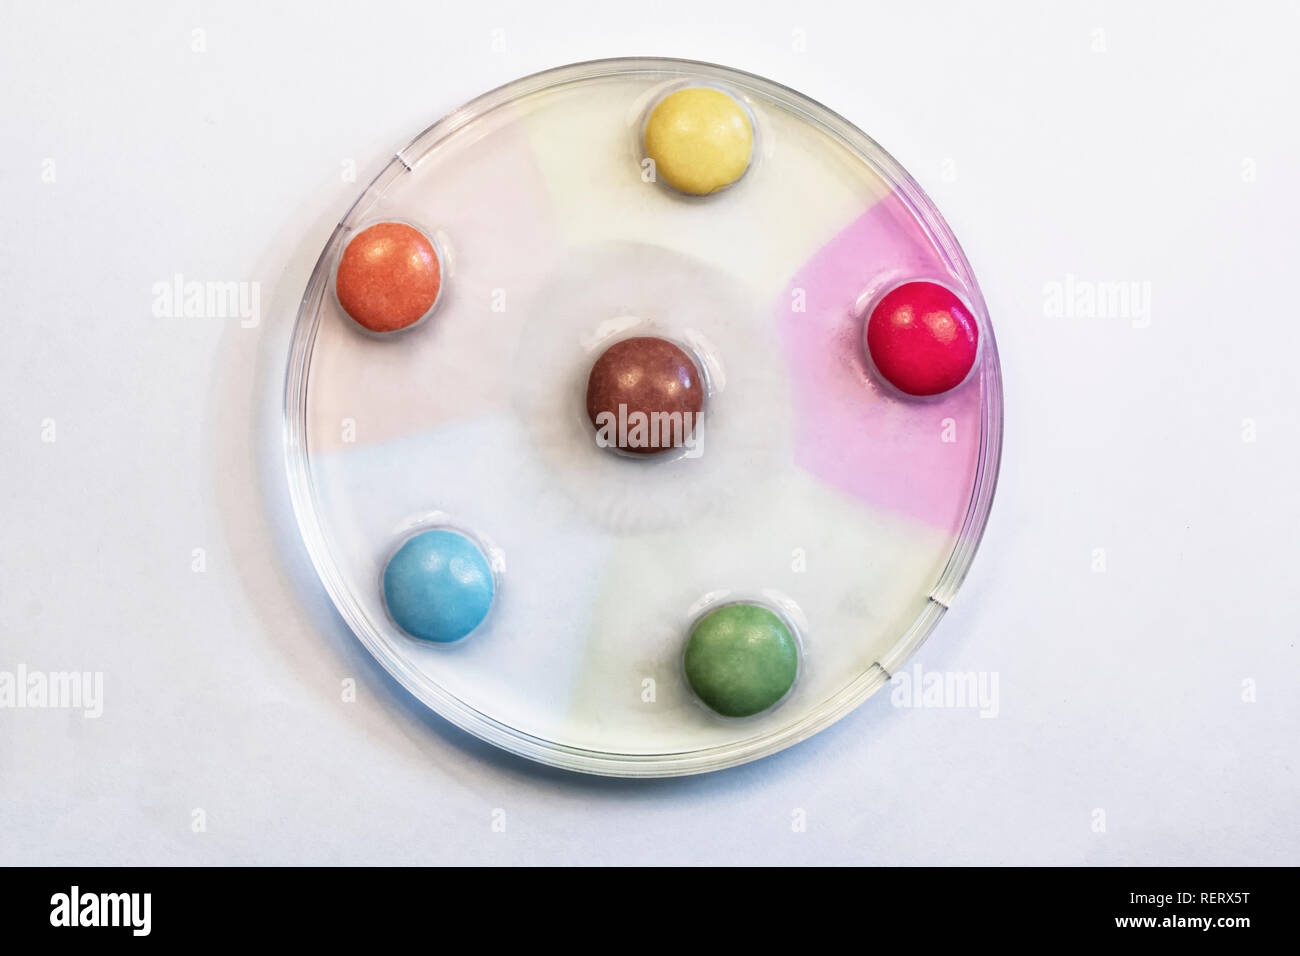 Diffusion experiment using sweets in a petri dish Stock Photo